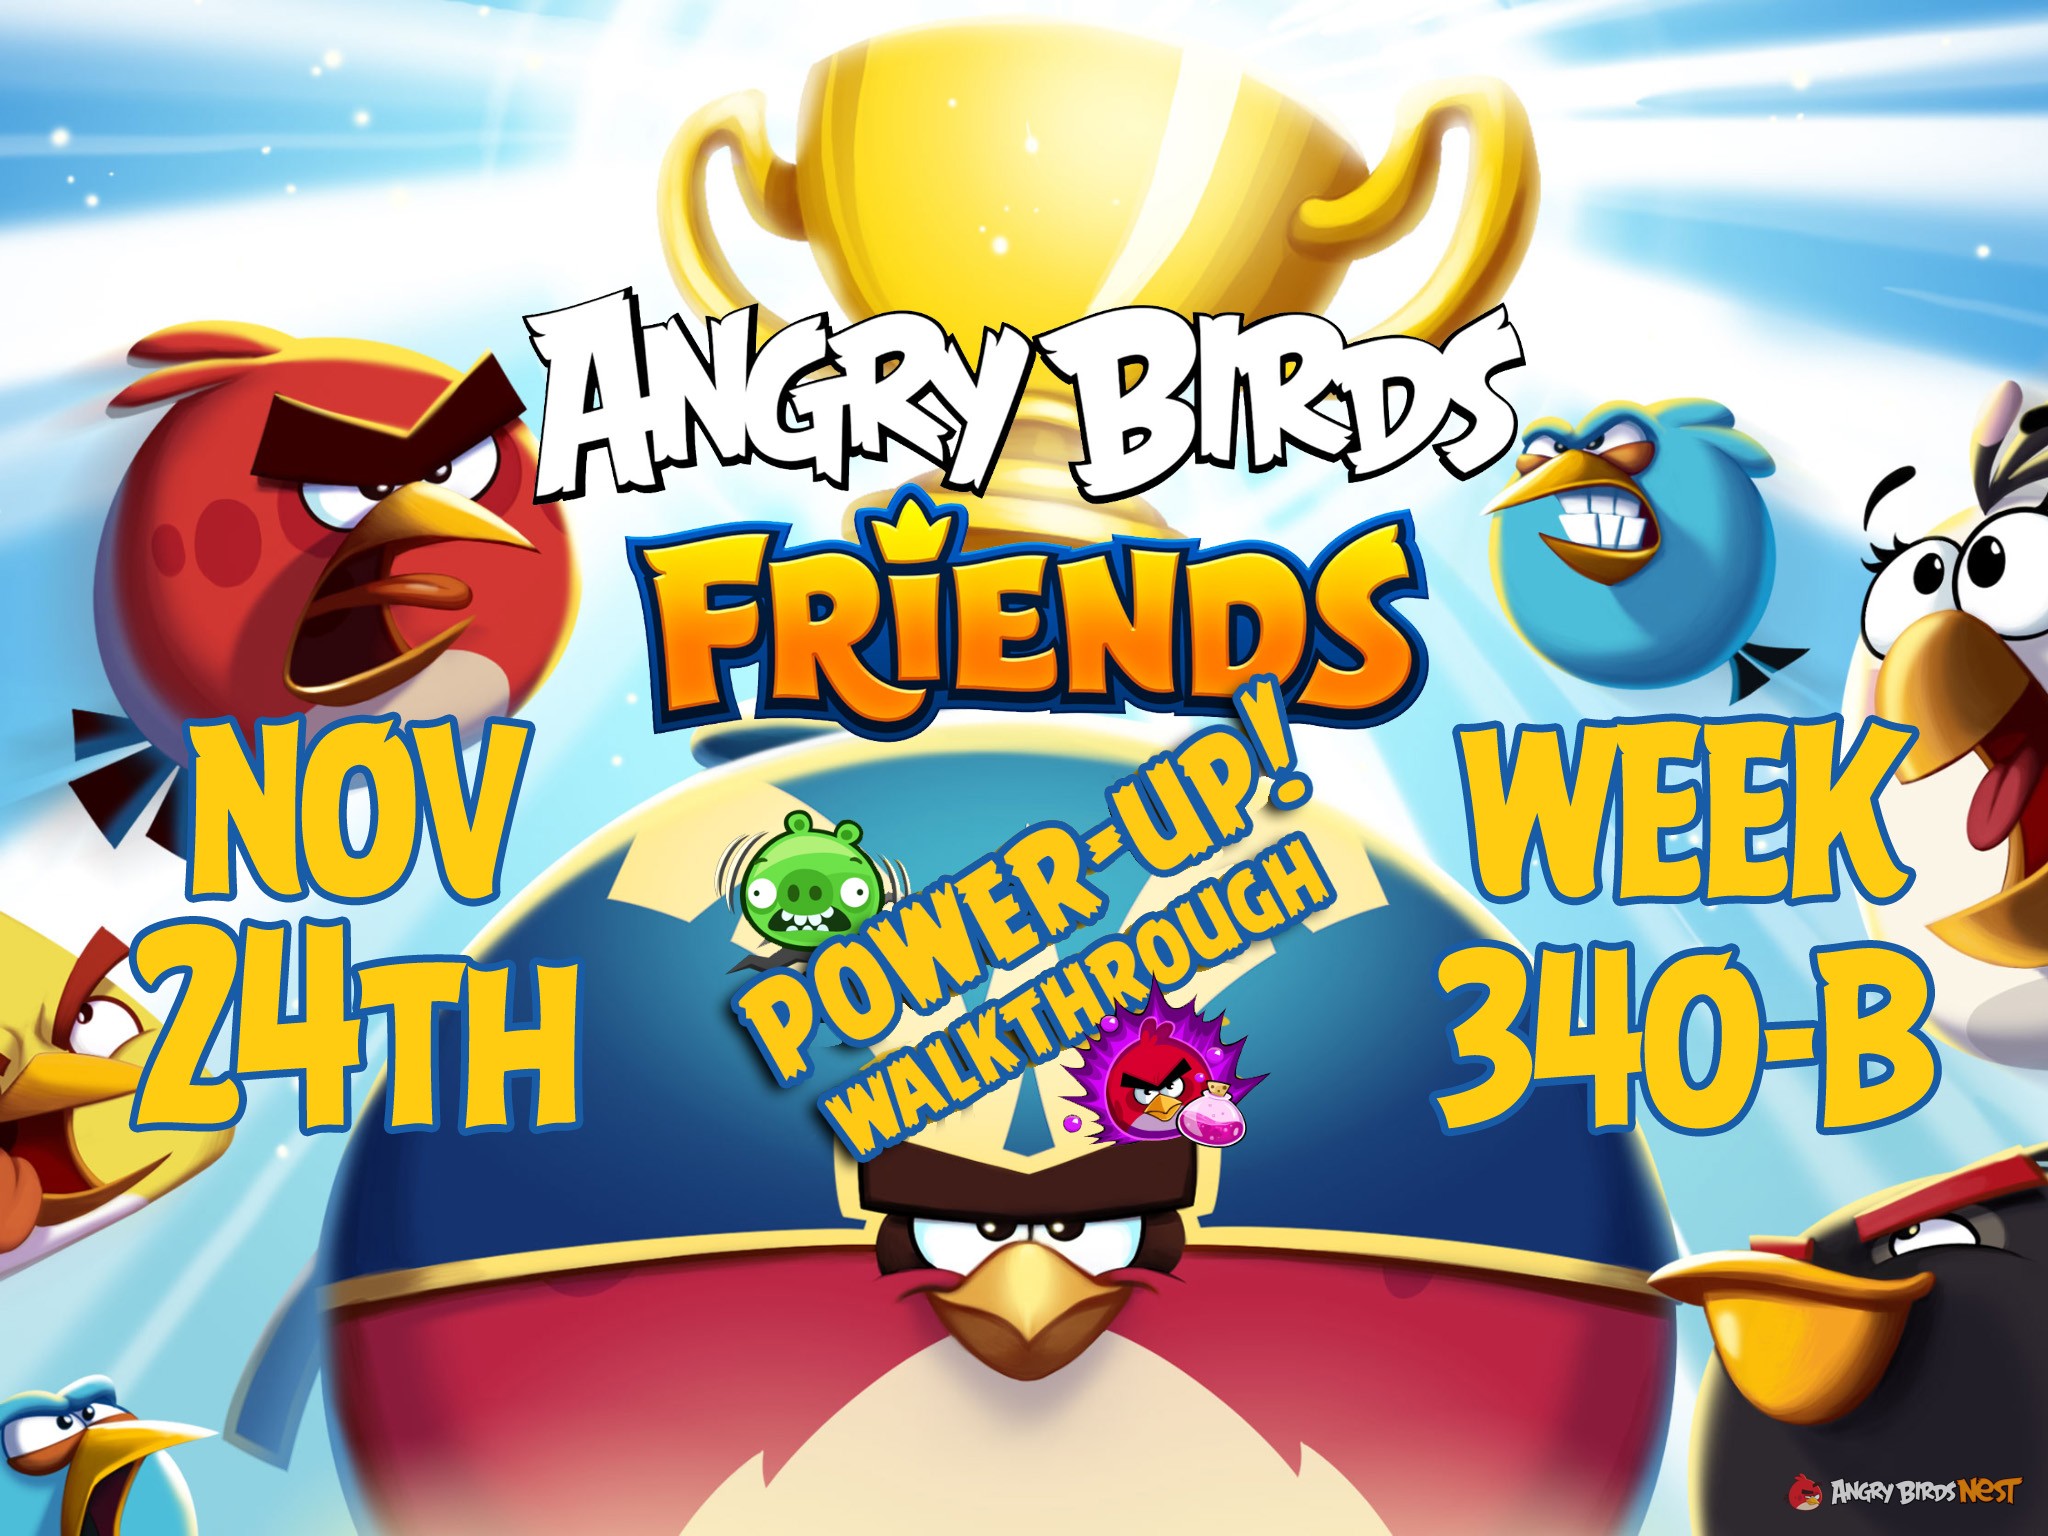 Angry-Birds-Friends-Tournament-Week-340-B-Feature-Image-PU